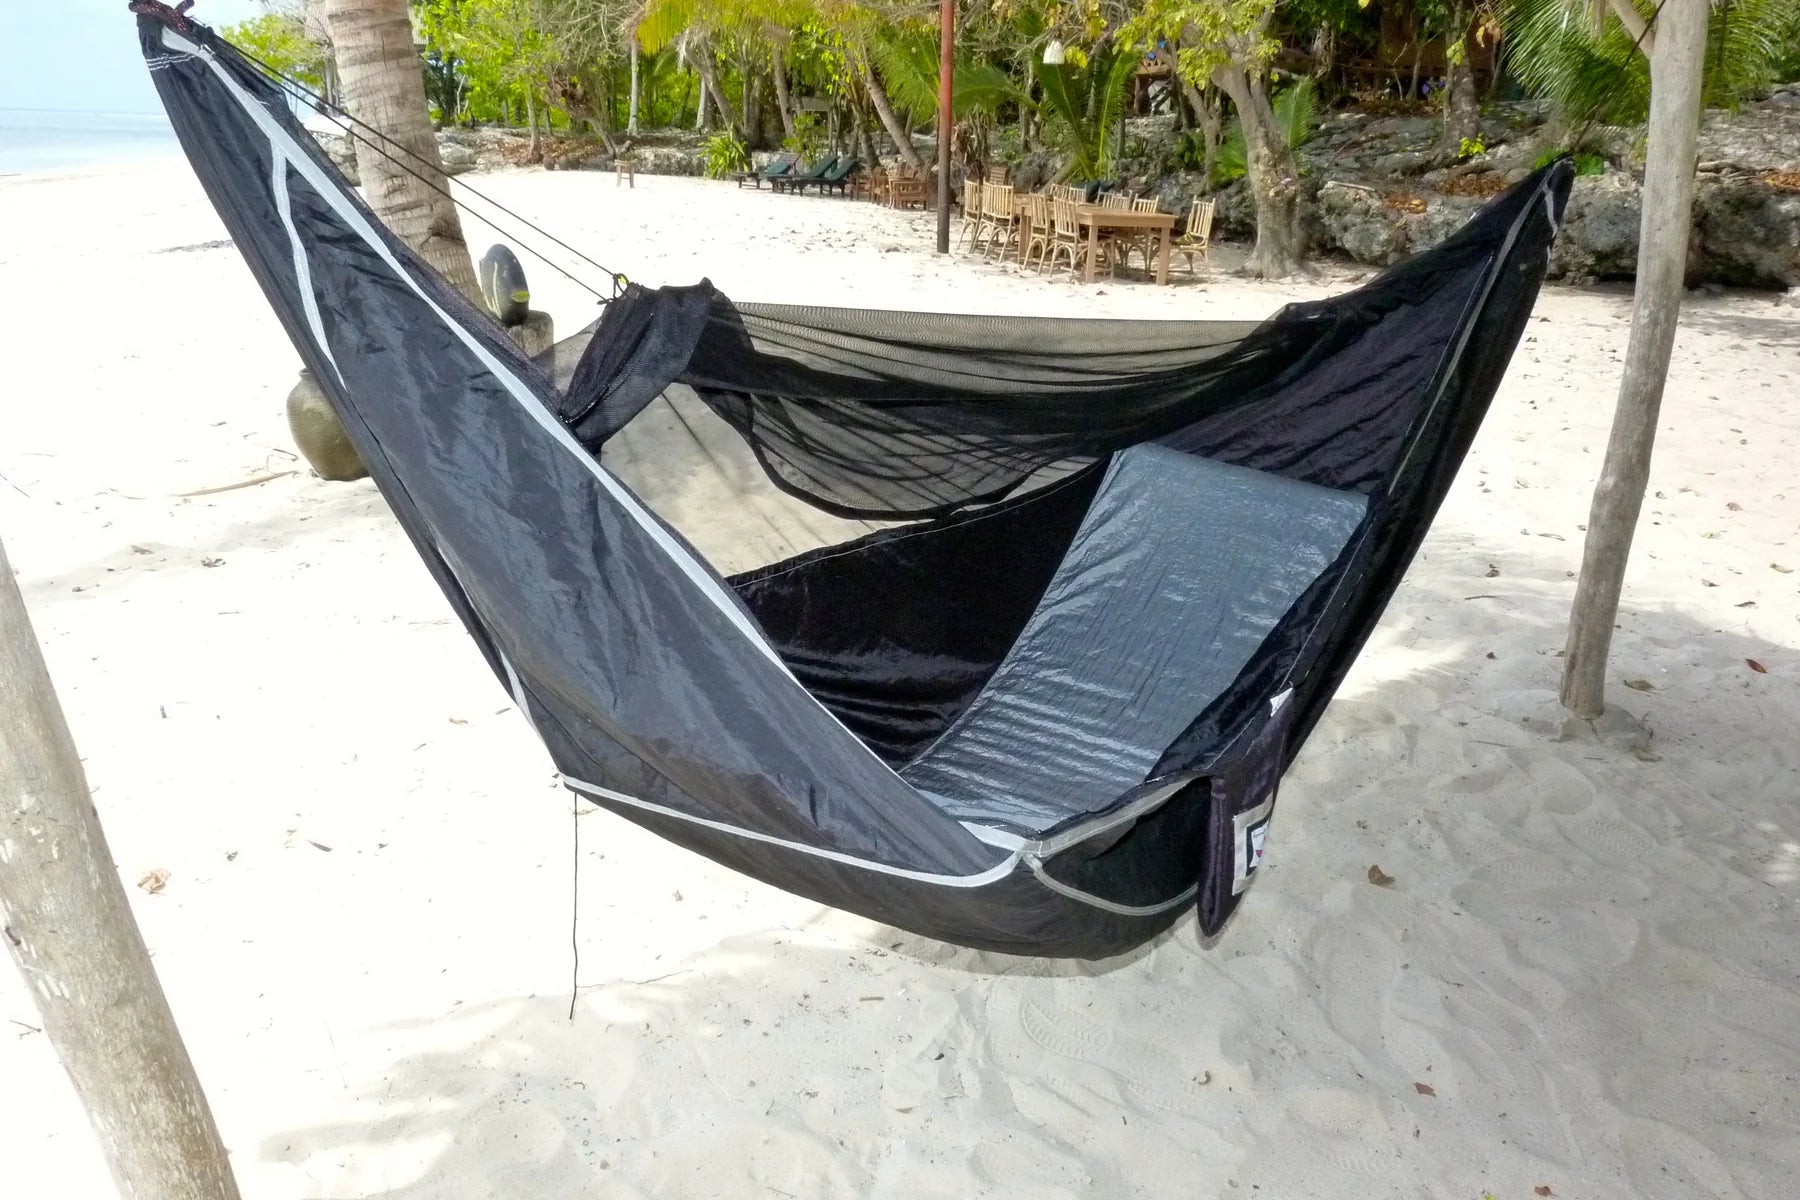 Hammock Bliss Skybed - Bugfree